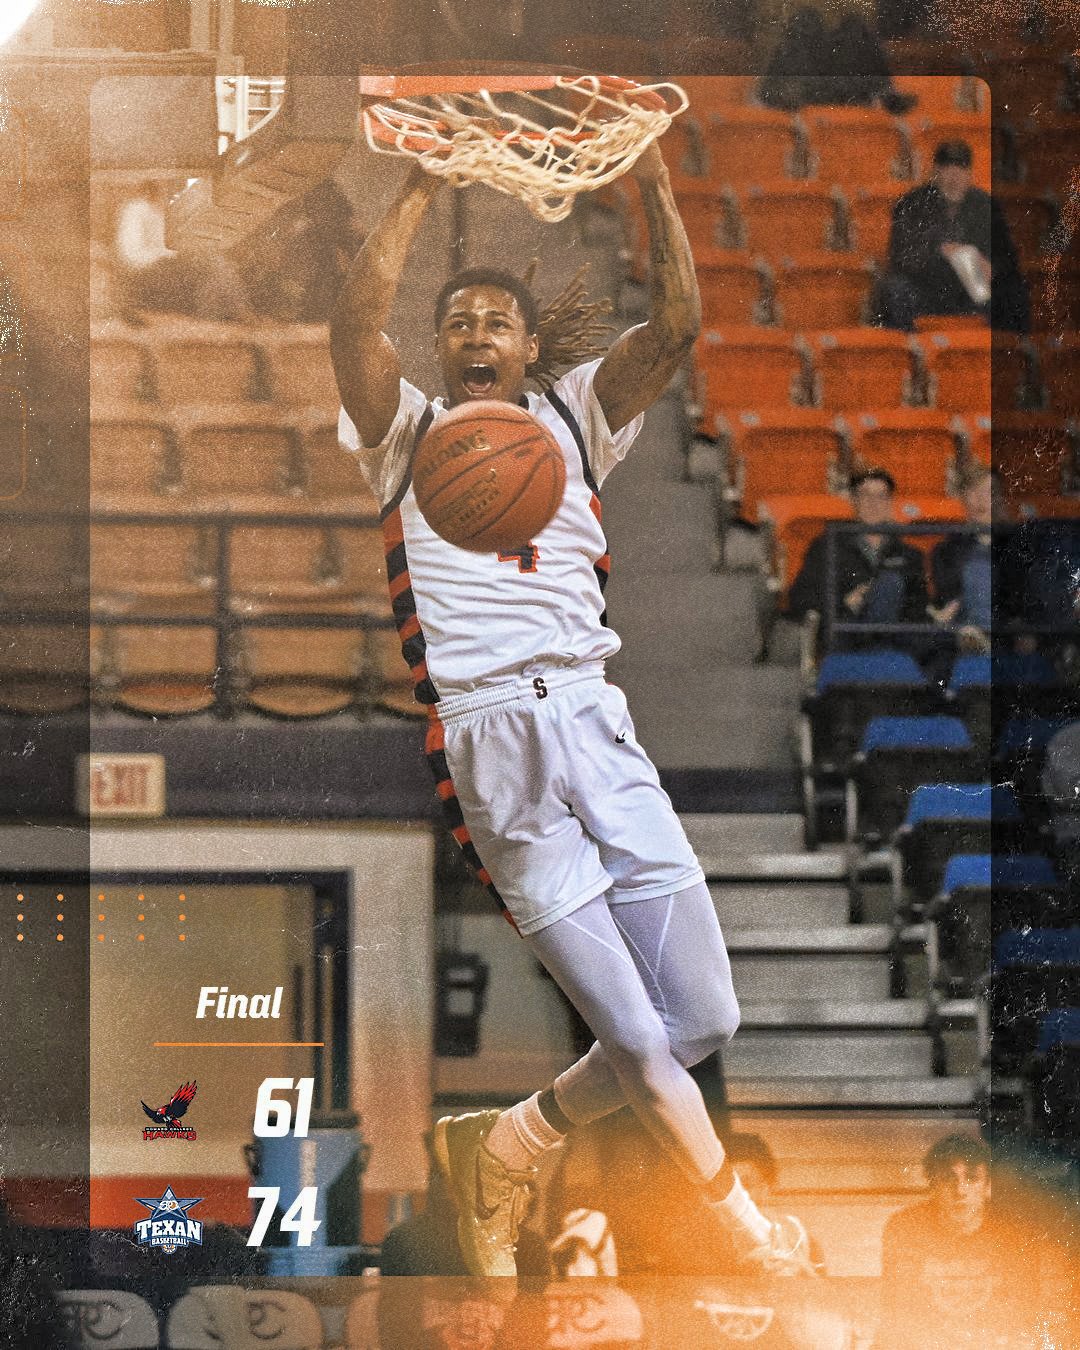 #1 Texans lock down Hawks,  remain unbeaten with 74-61 conference win over Howard